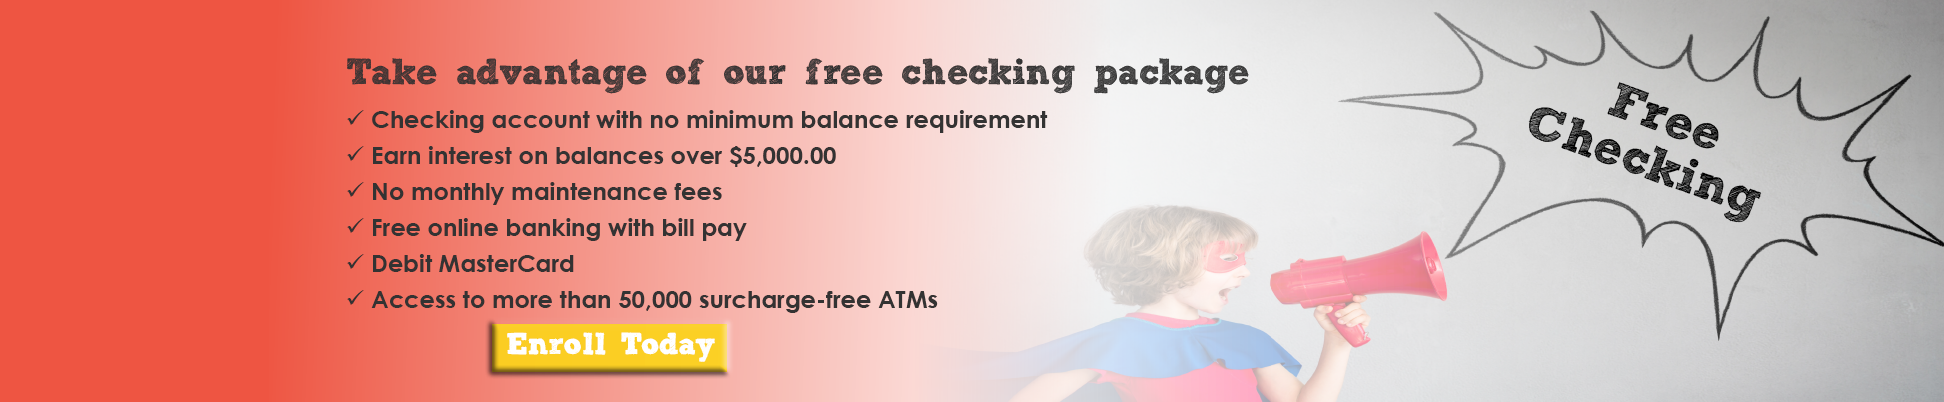 Take Advantage of our Free Checking Package